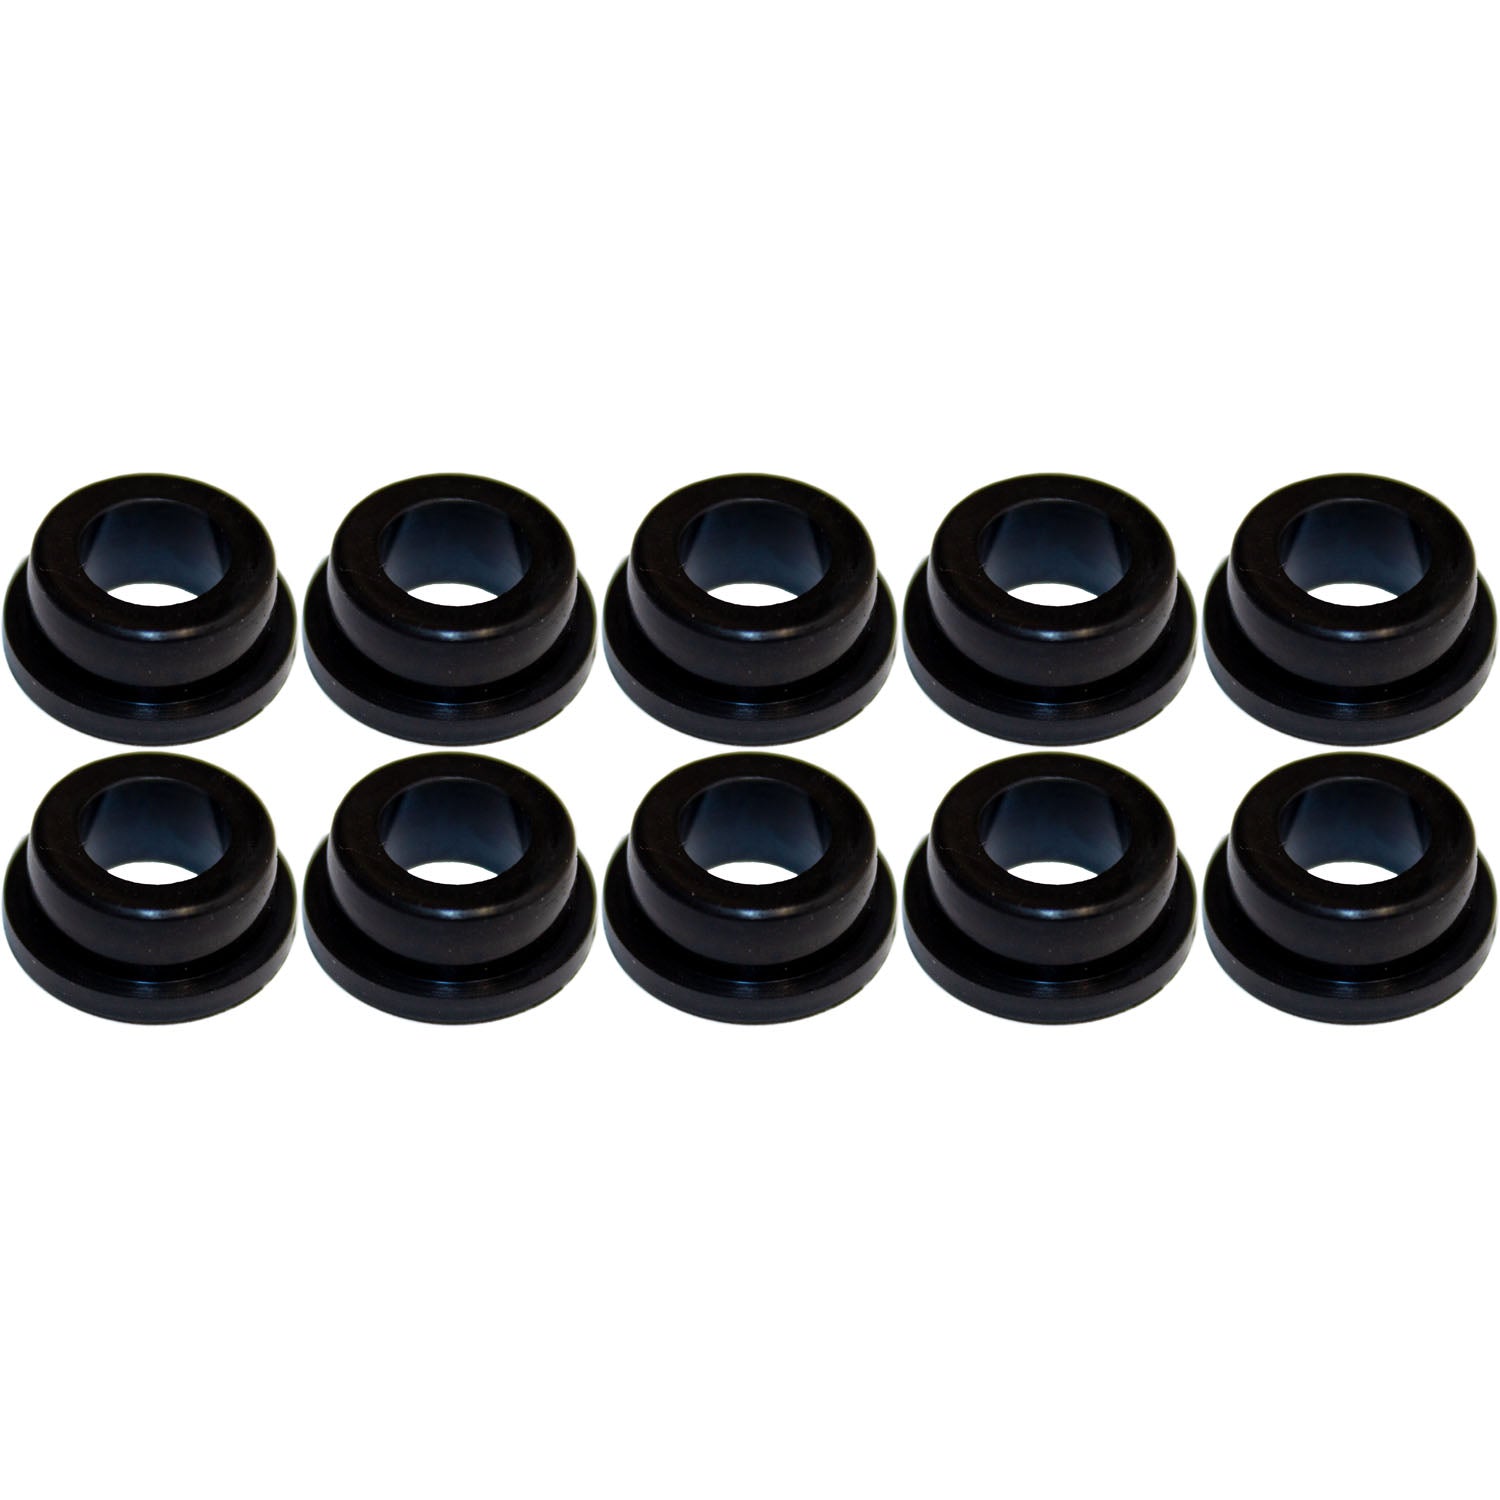 Dill 525 .625 Rubber Grommet TR# RG-39 - Pack of 10